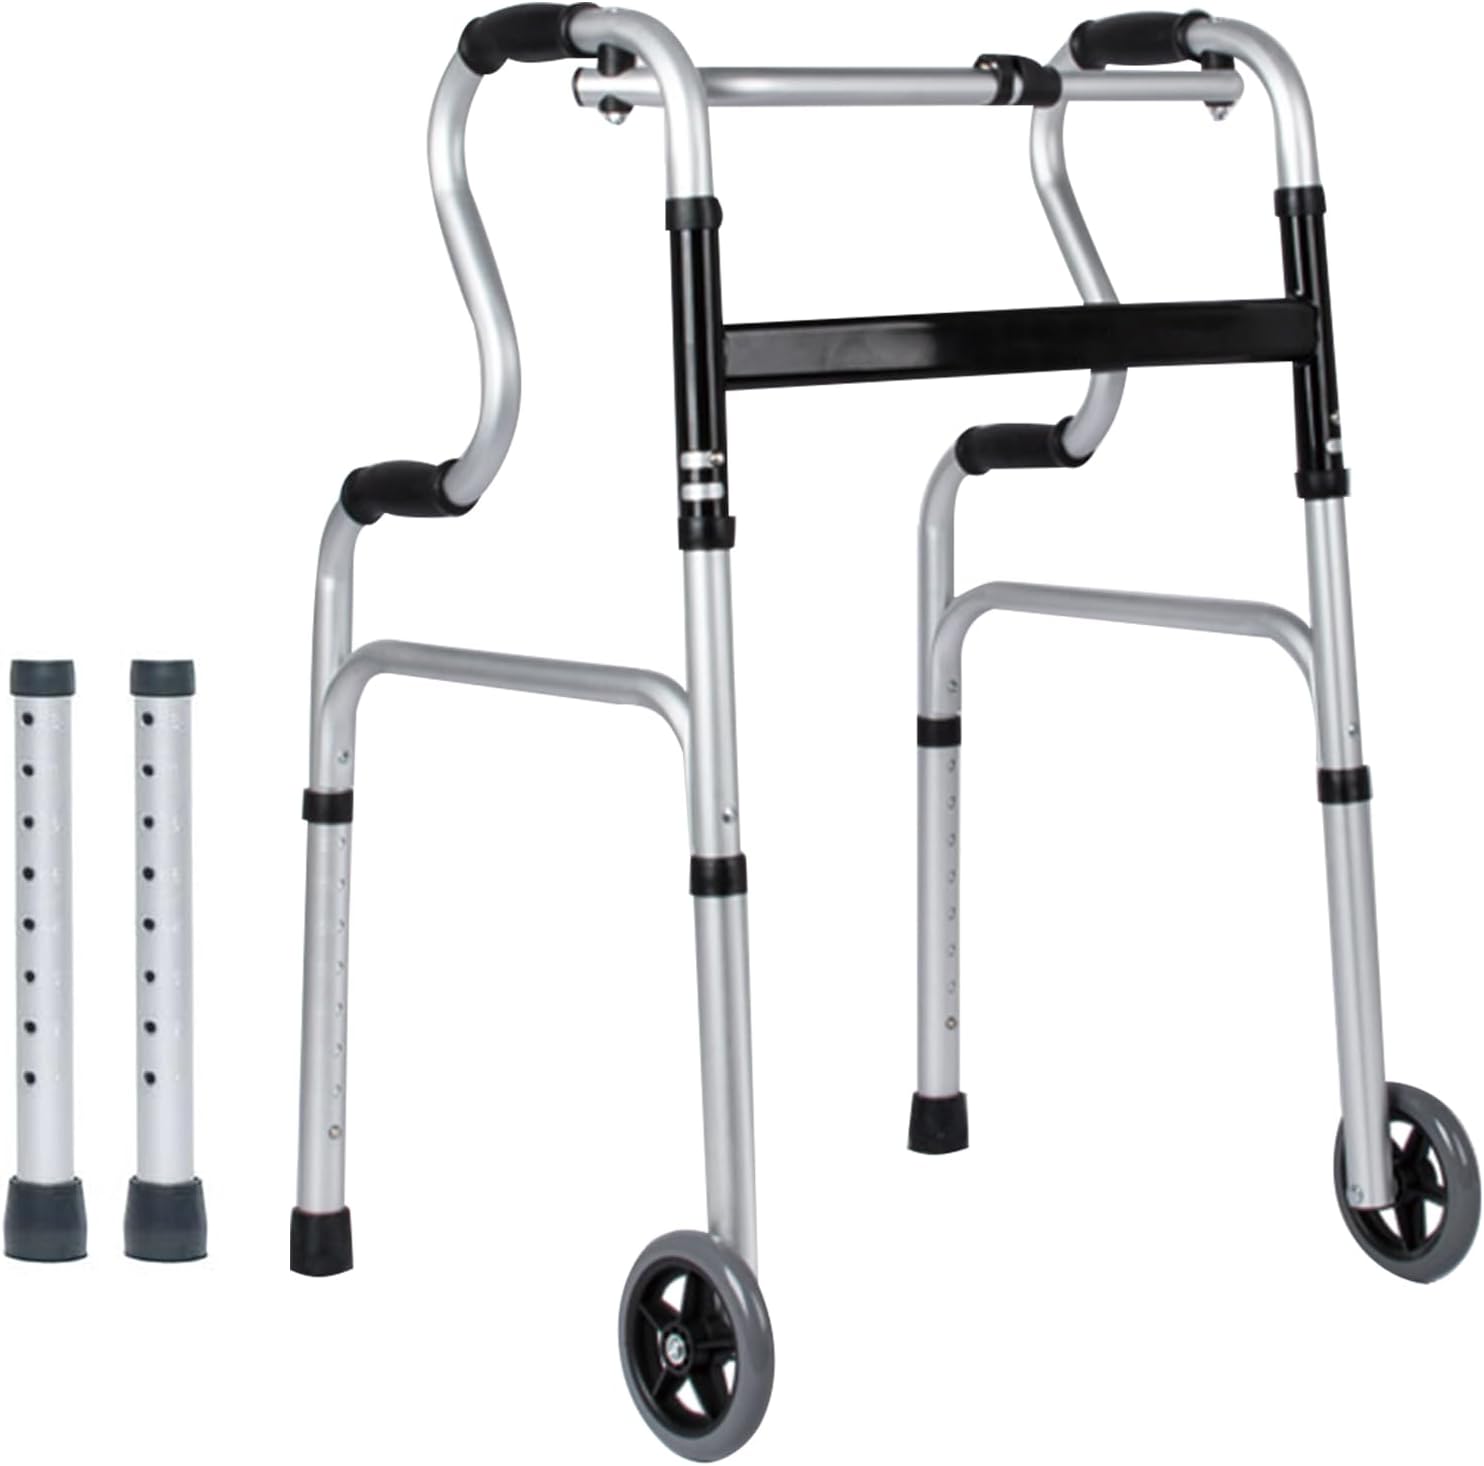 Medical Rehabilitation 3-in-1 stand-up assist folding Walker assists support narrow-lane walkers for seniors up to 440 pounds